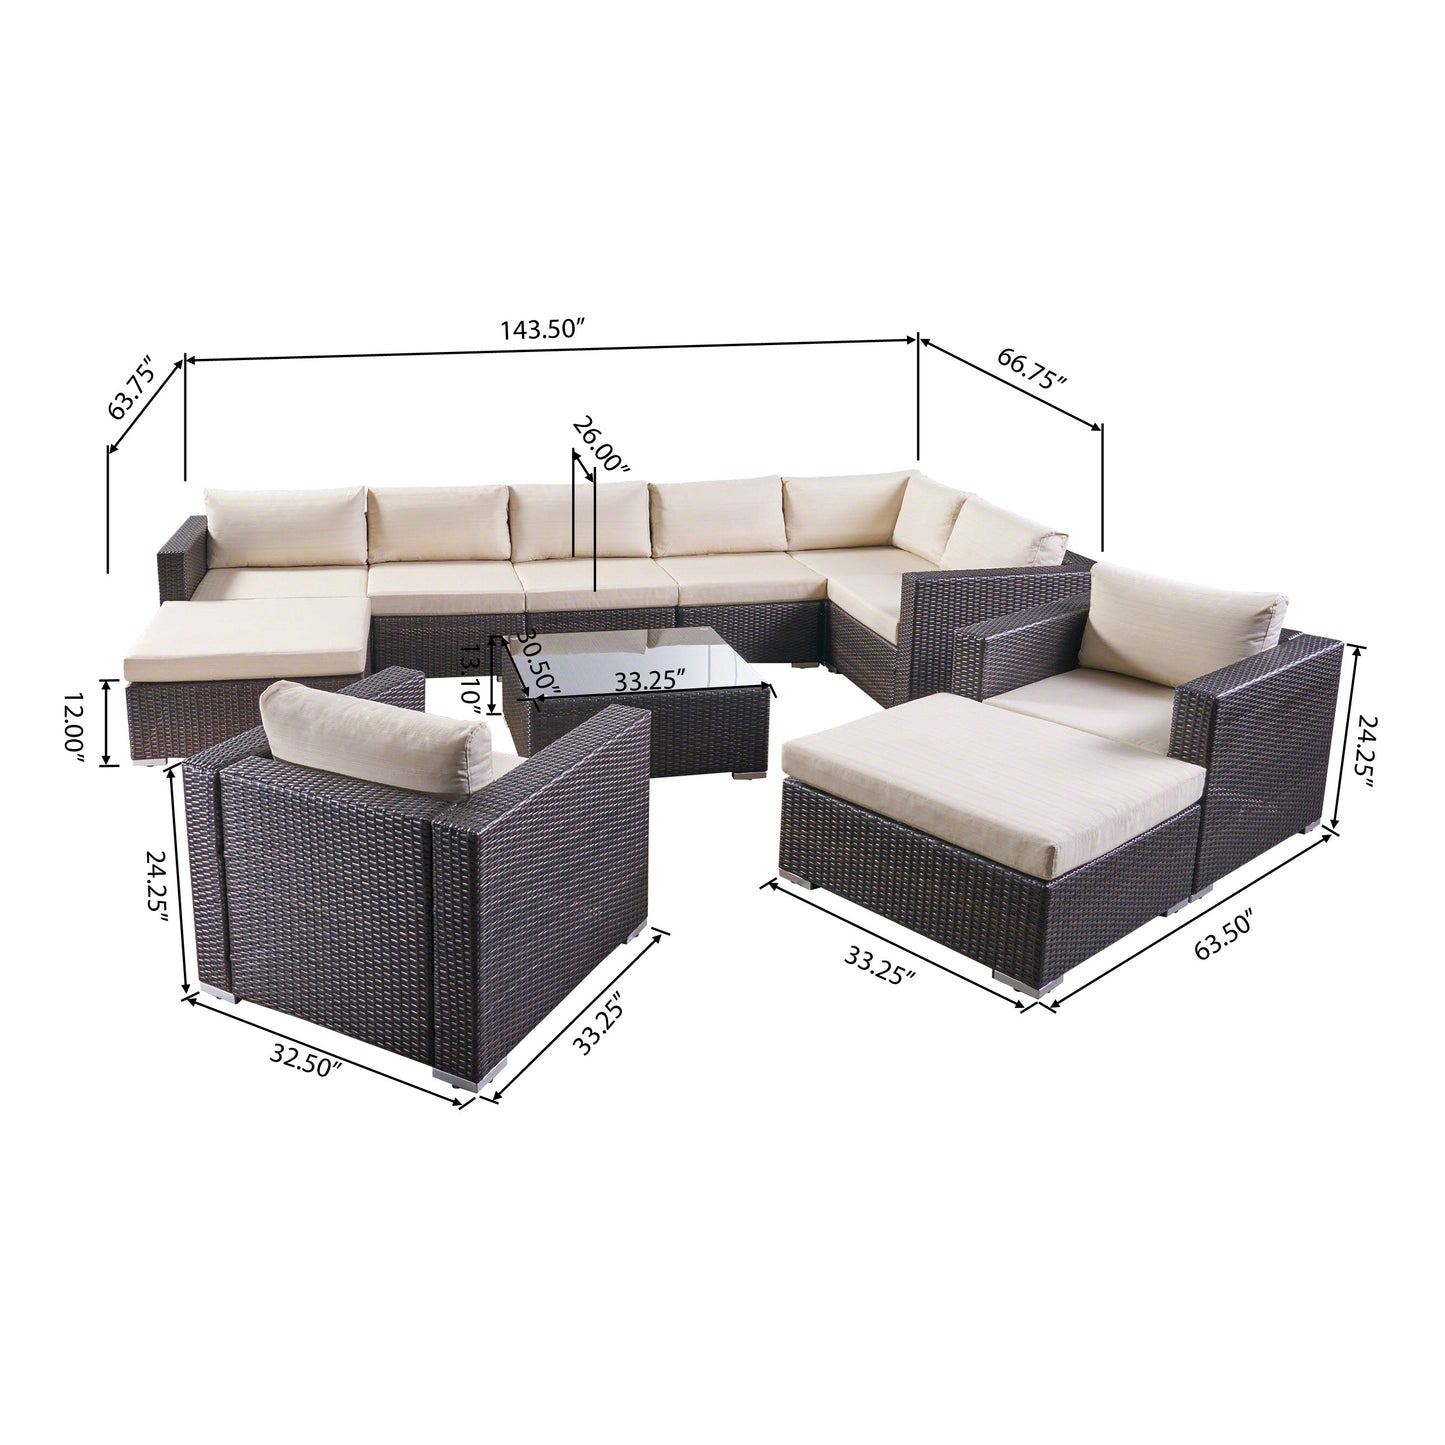 Tom Rosa Outdoor 8 Seater Wicker Sectional Sofa Set with Cushions